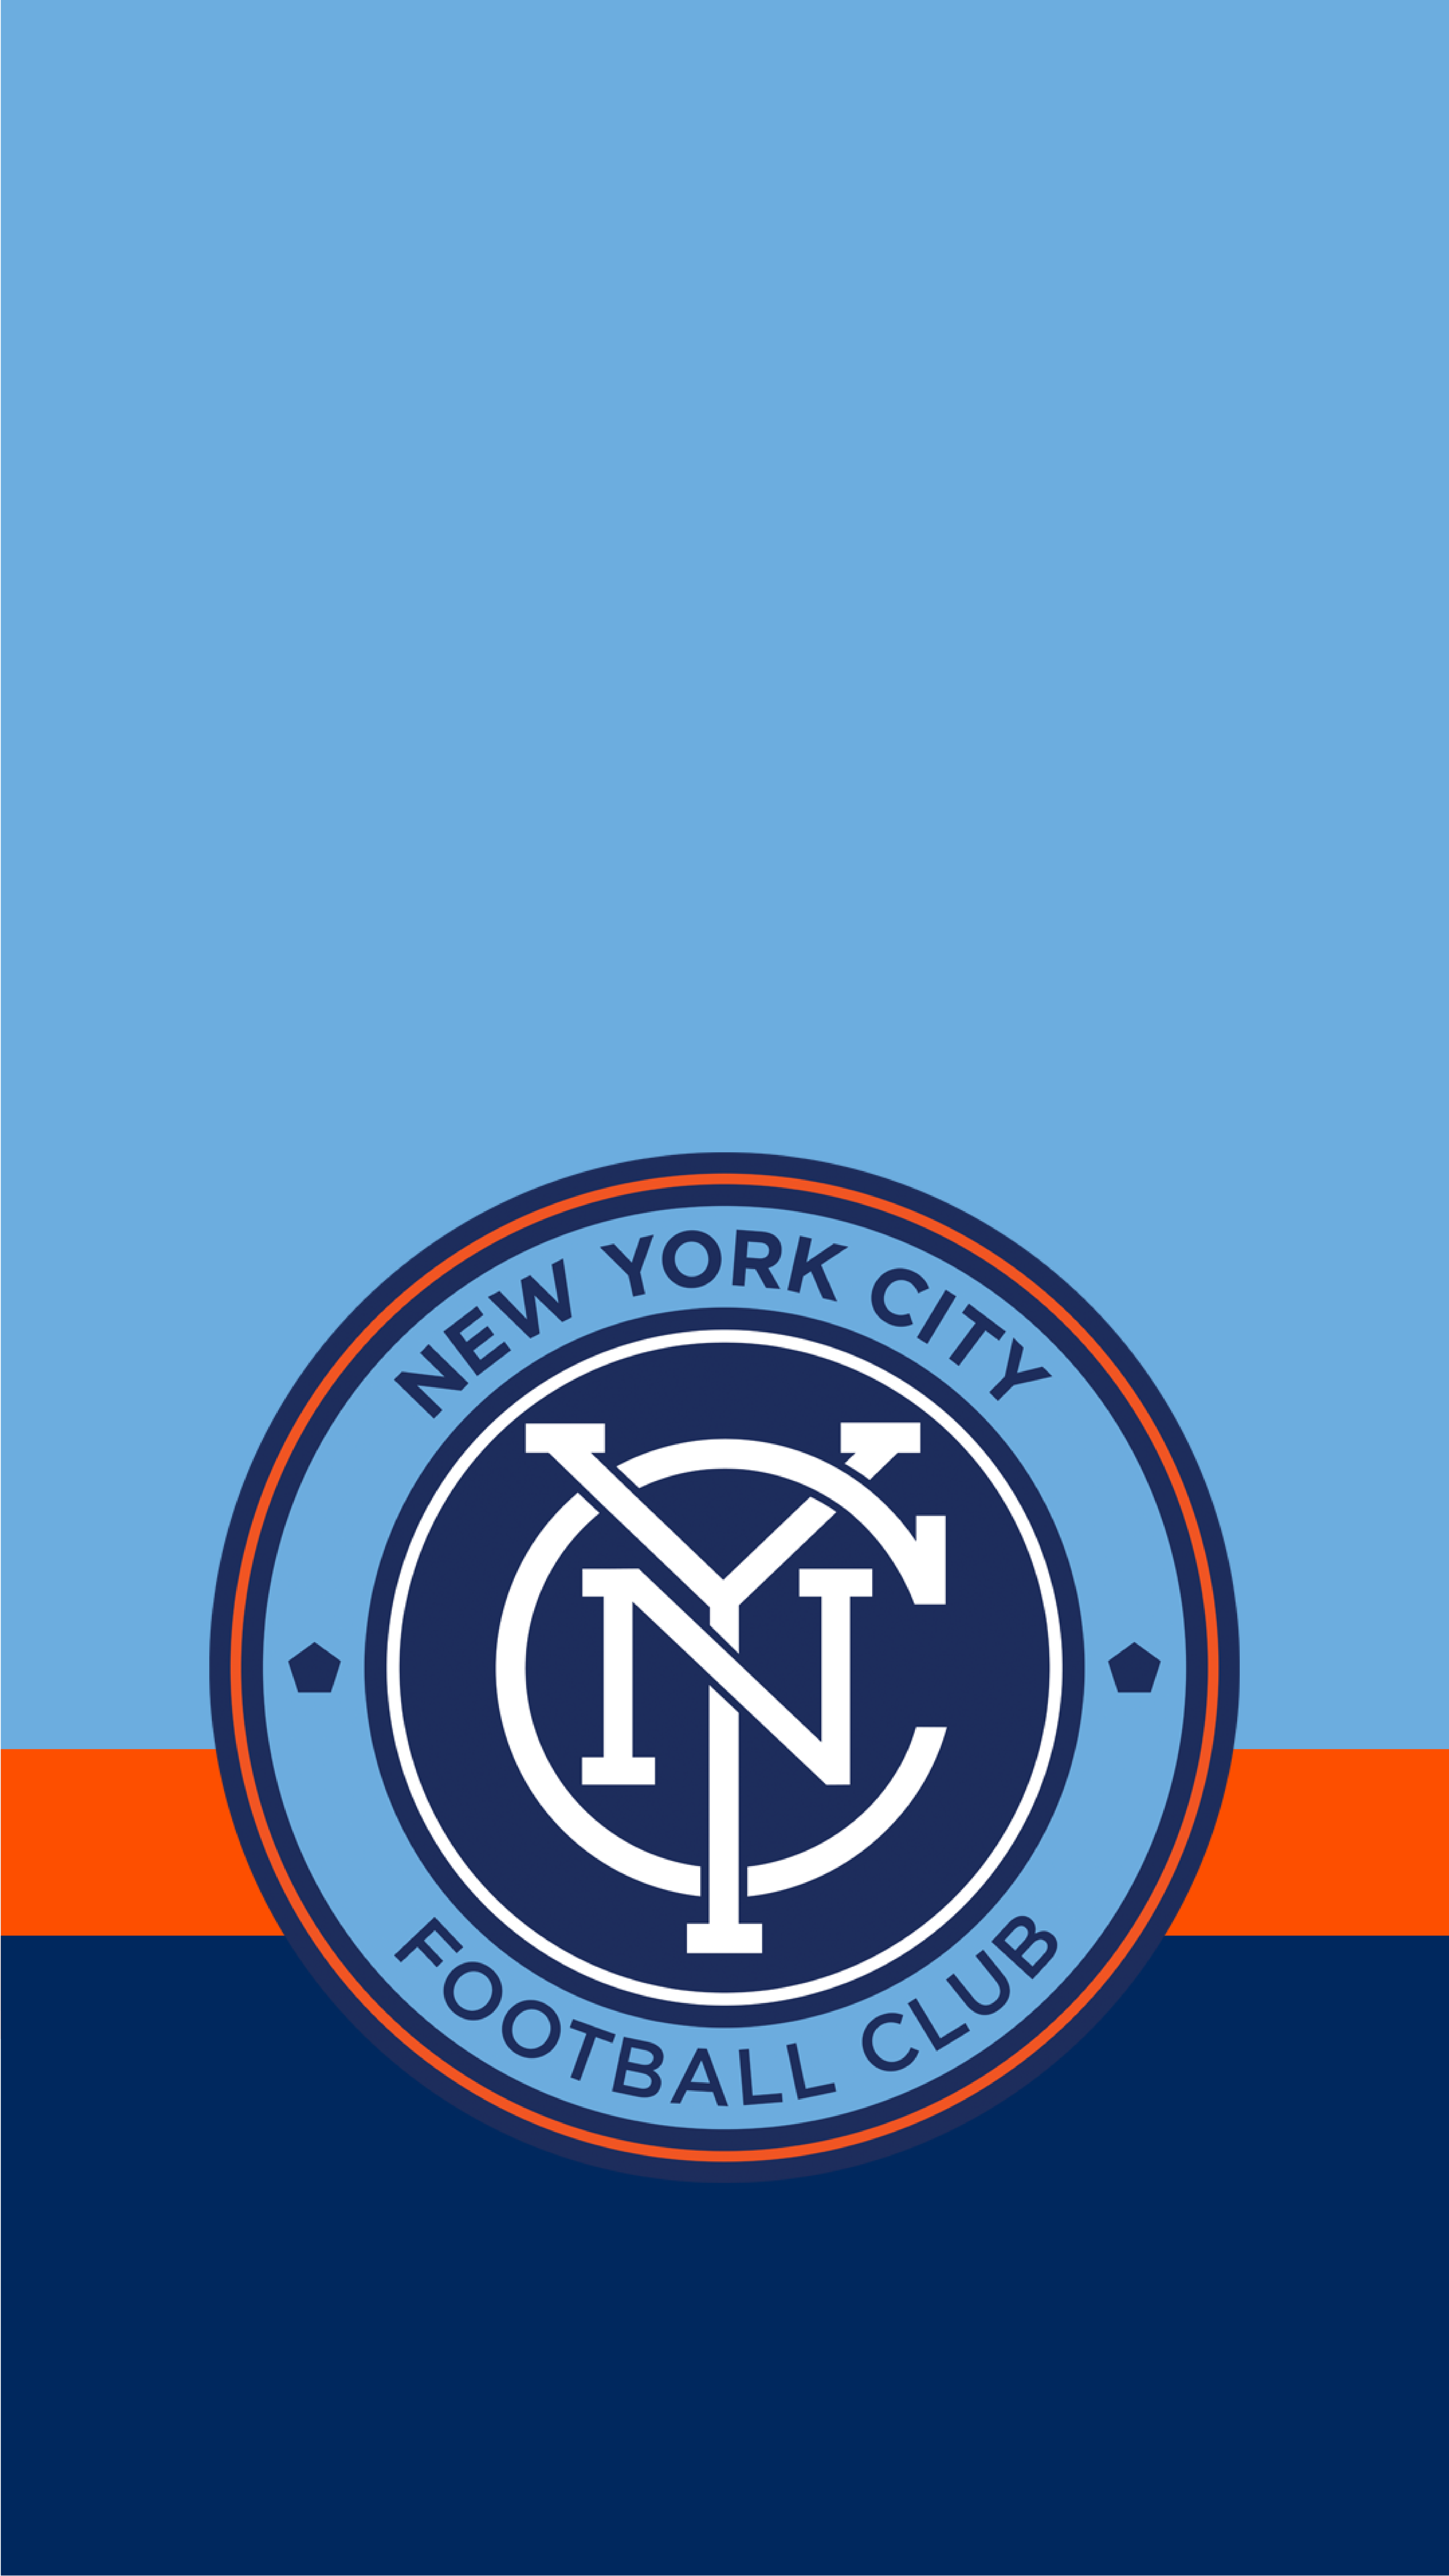 Download For Iphone X - New York City Fc Logo , HD Wallpaper & Backgrounds